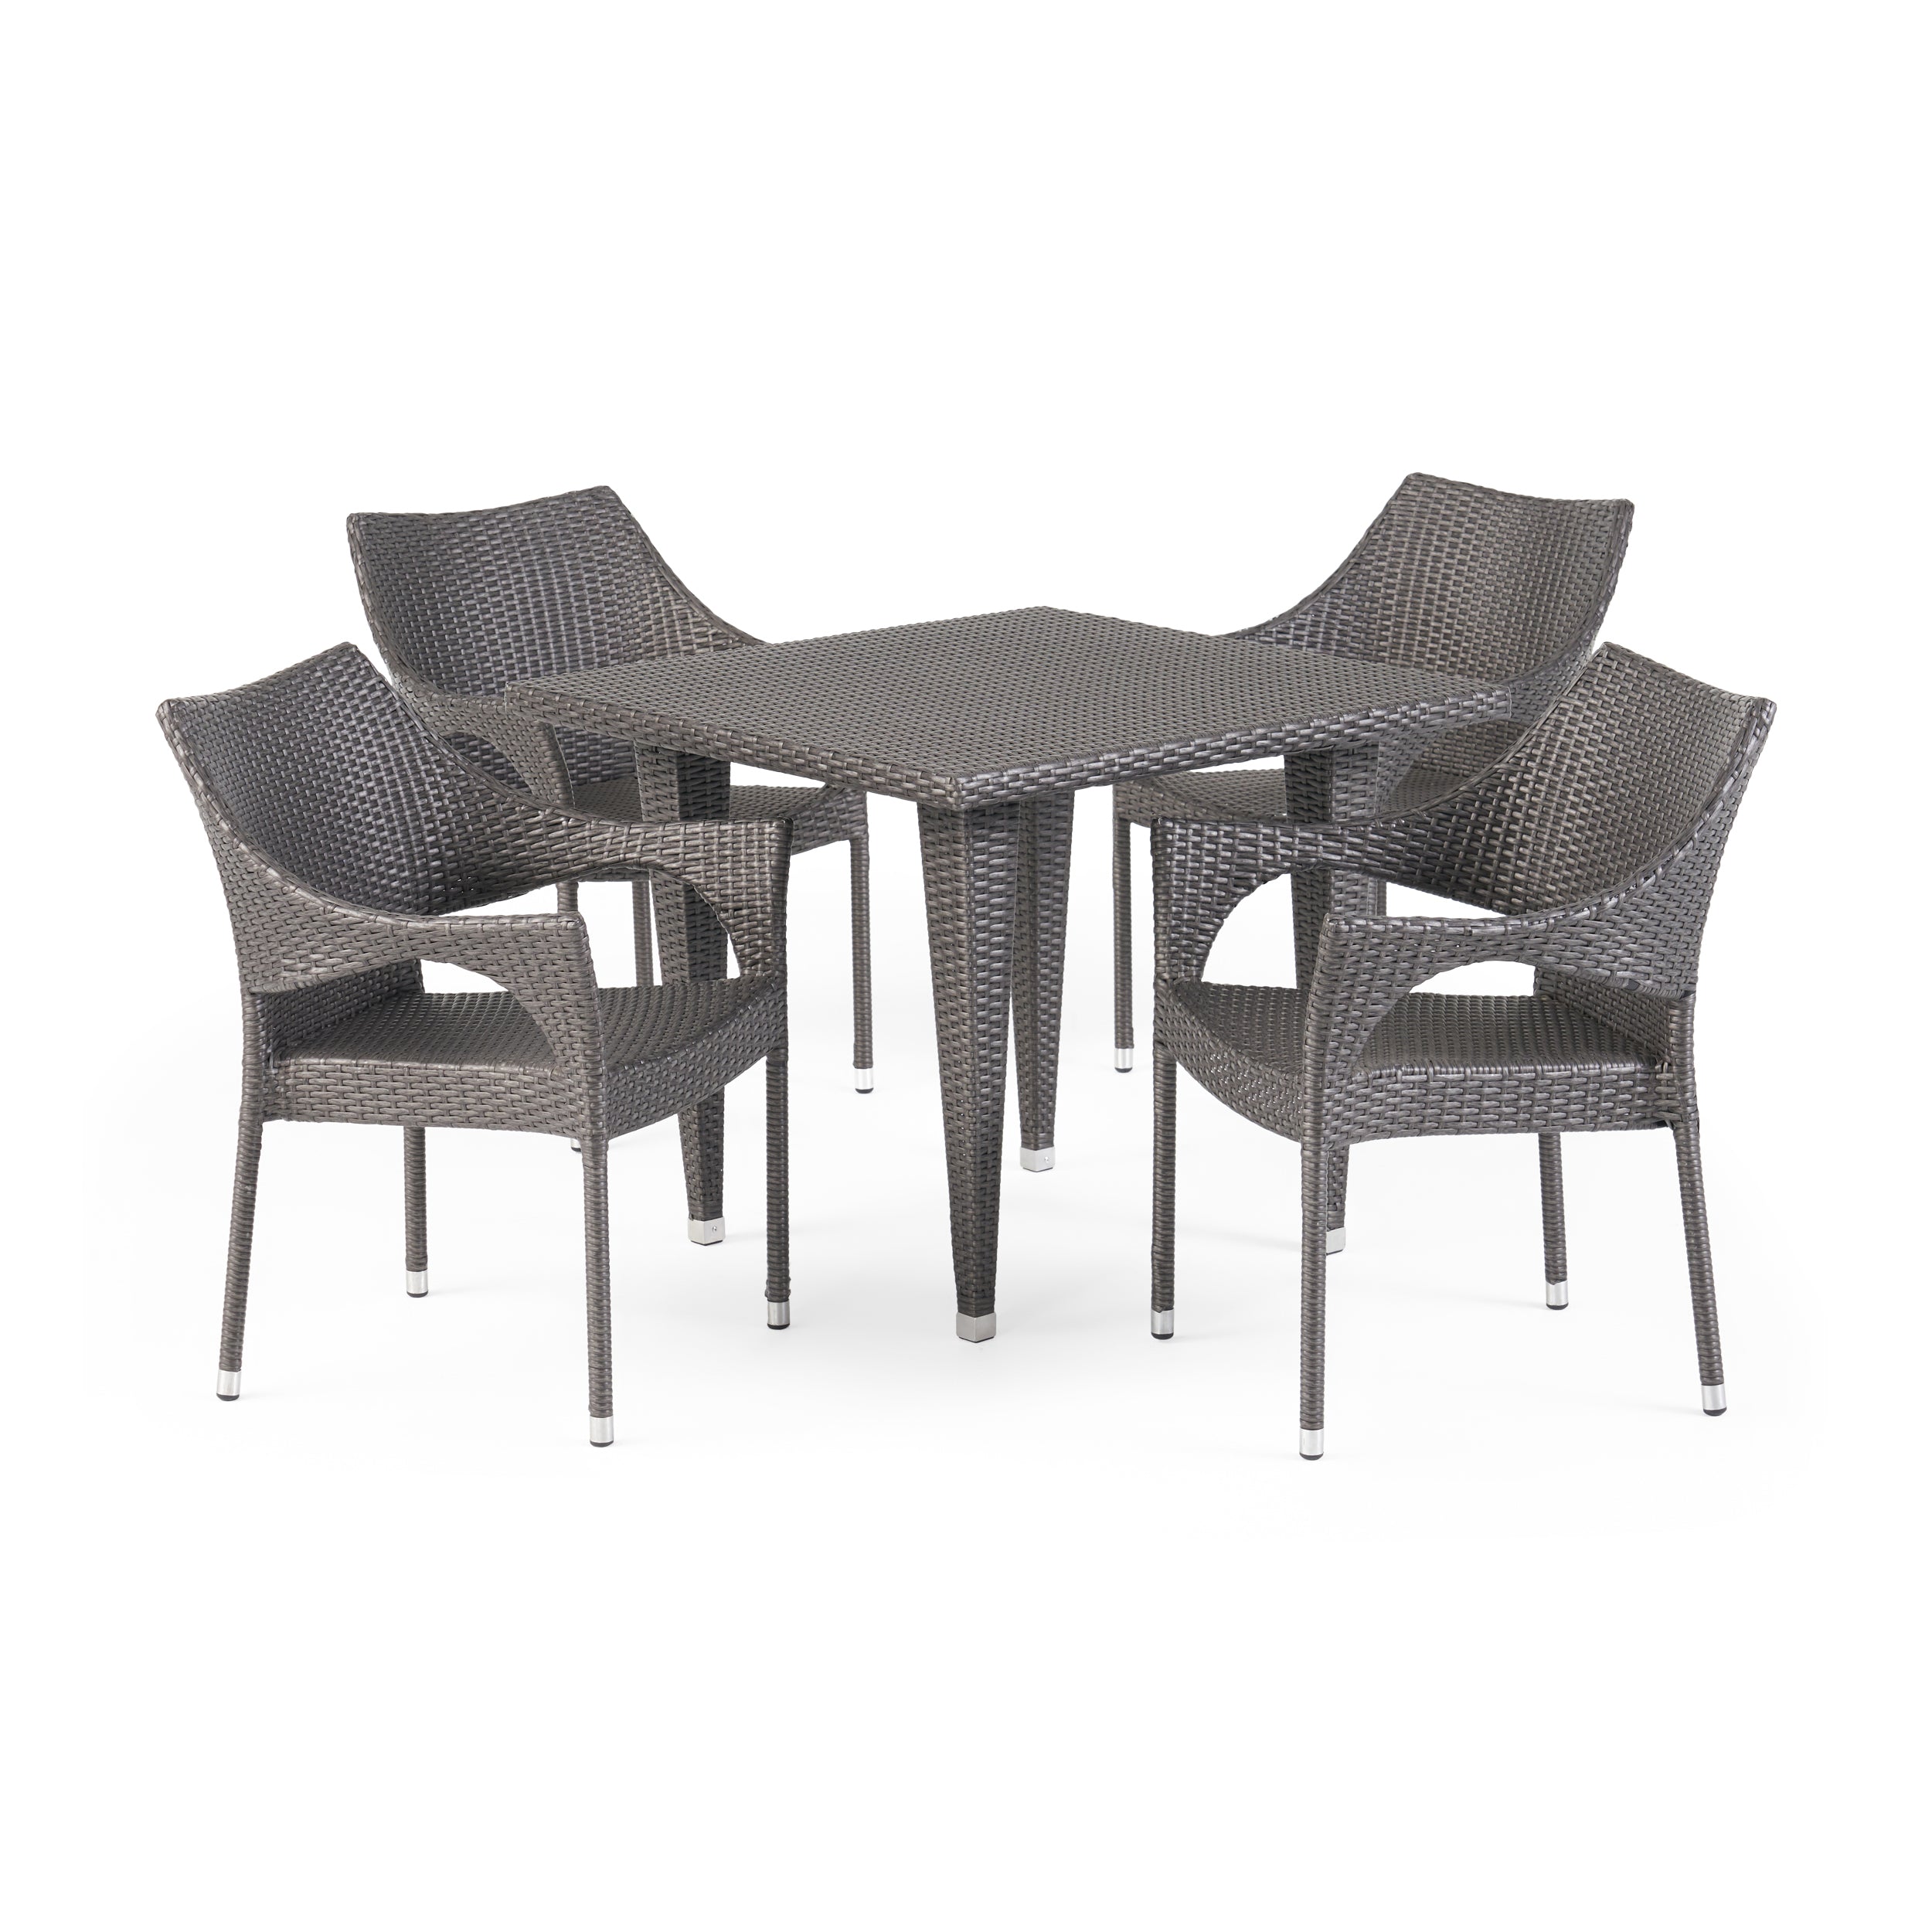 Alameda Outdoor 5 Piece Gray Wicker Dining Set with Stacking Chairs